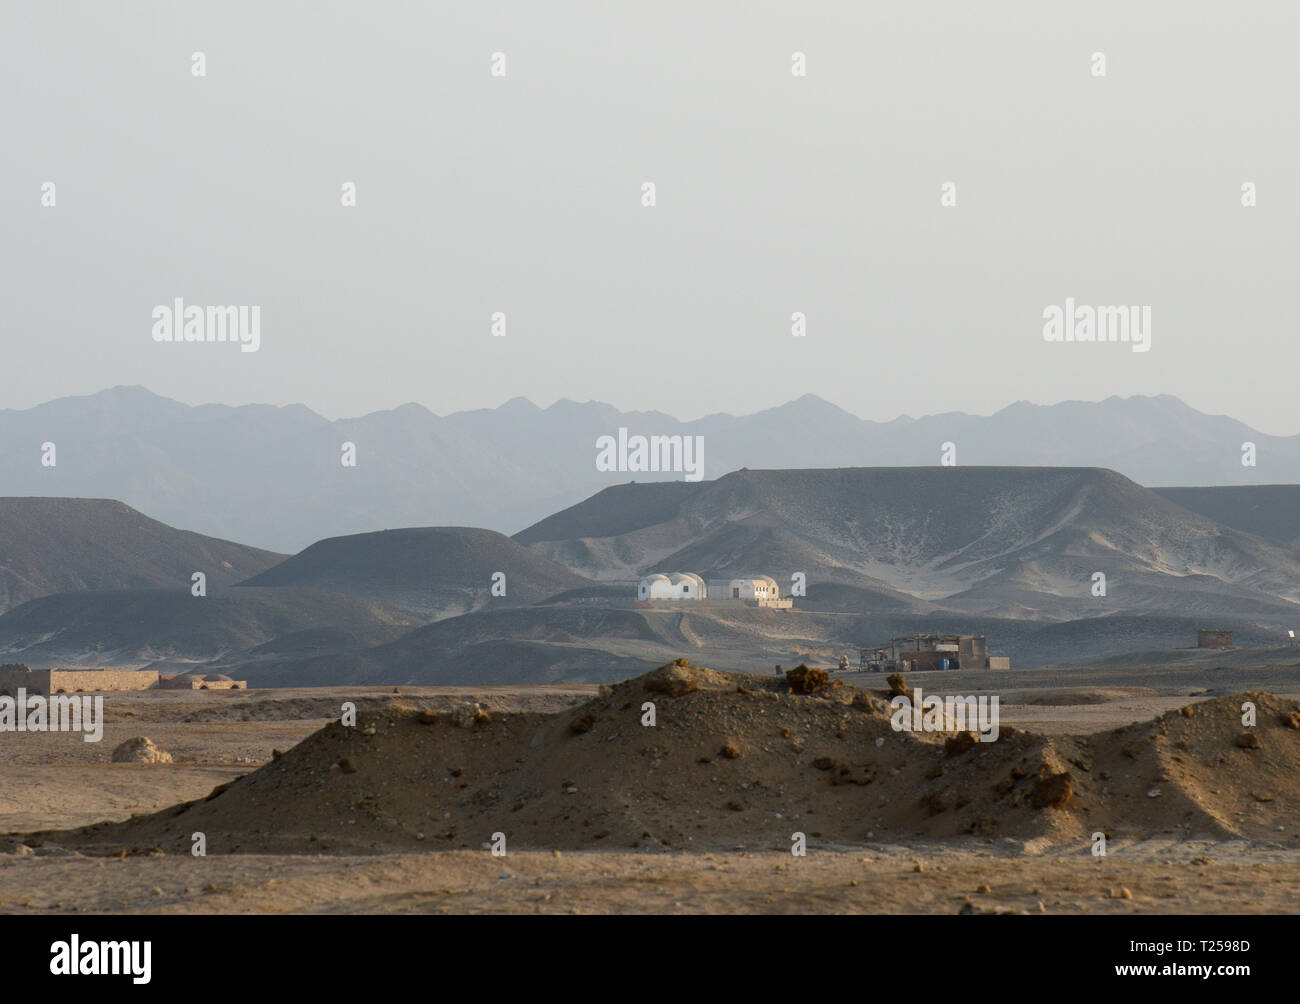 Desert view with small dwellings and earthworks, Hamata, Egypt Stock Photo